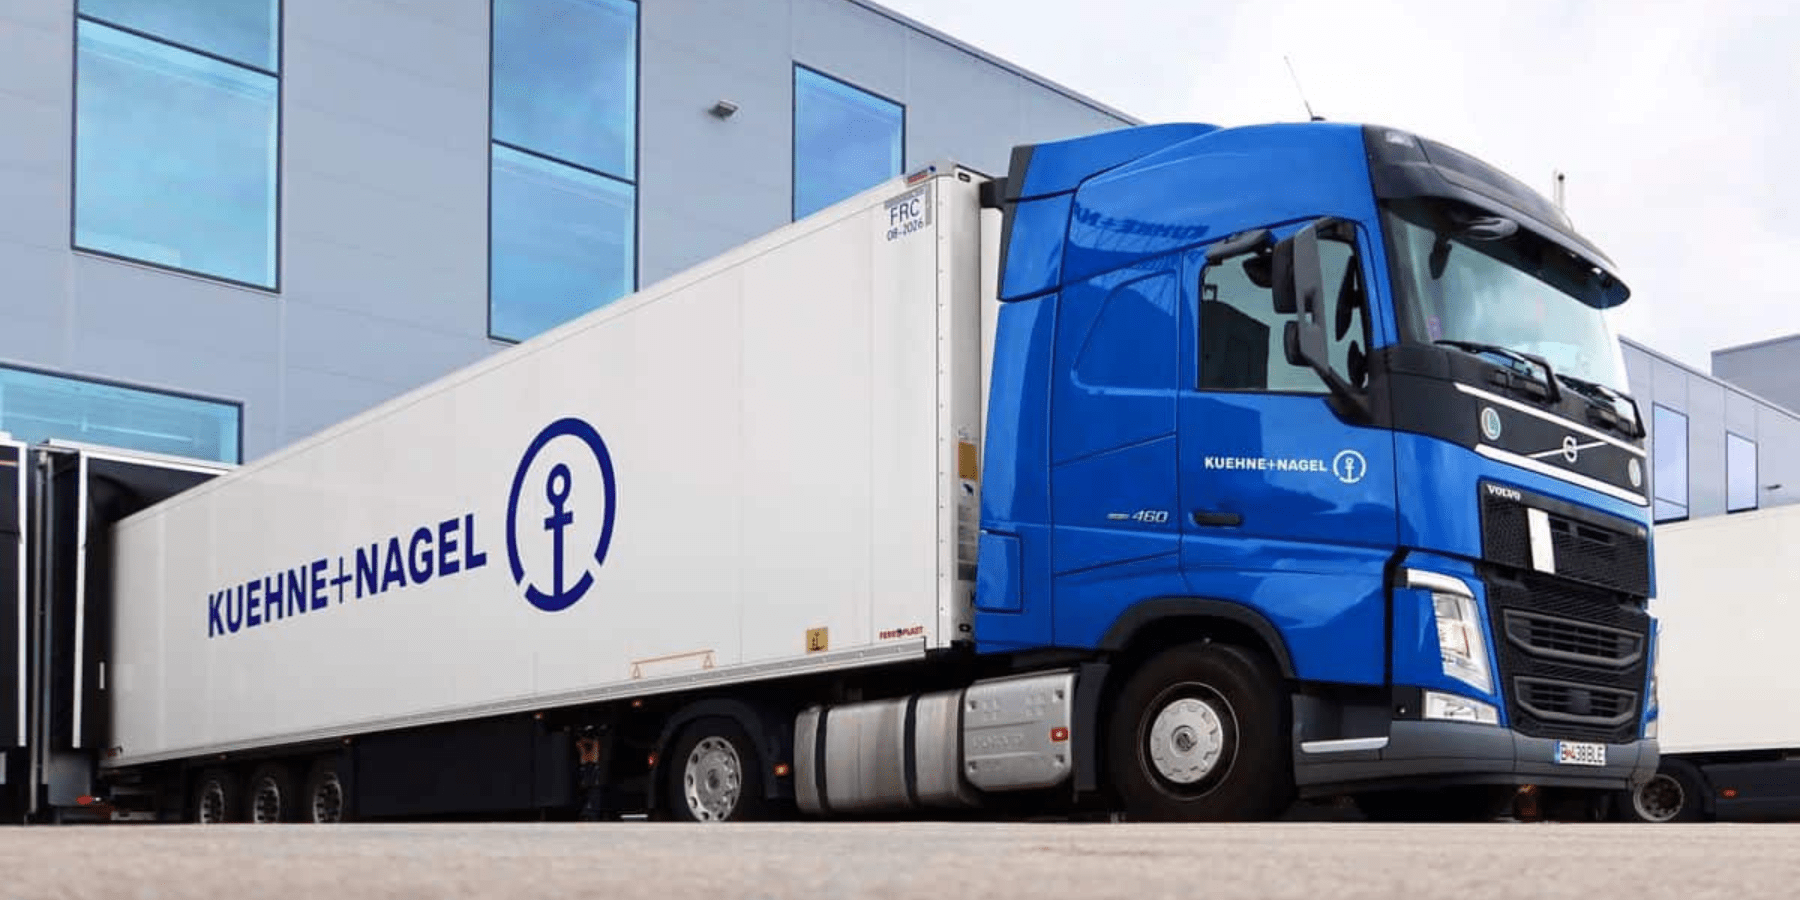 Kuehne + Nagel Freight truck ready for dispatch